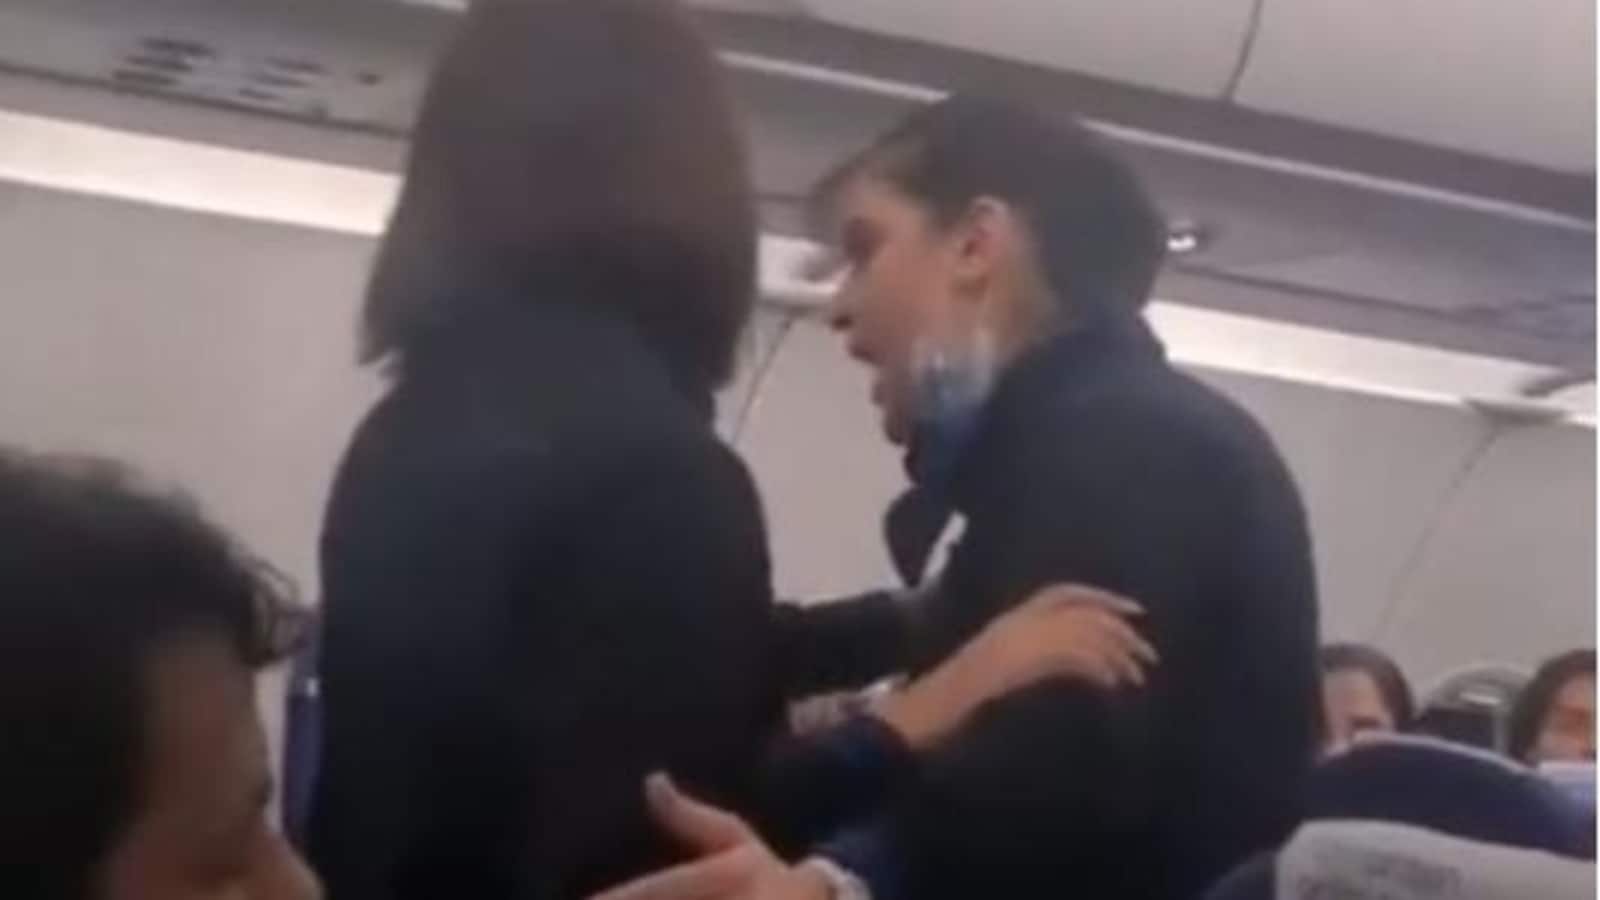 1600px x 900px - Not your servant': Video shows fight between IndiGo air hostess, passenger  | Latest News India - Hindustan Times